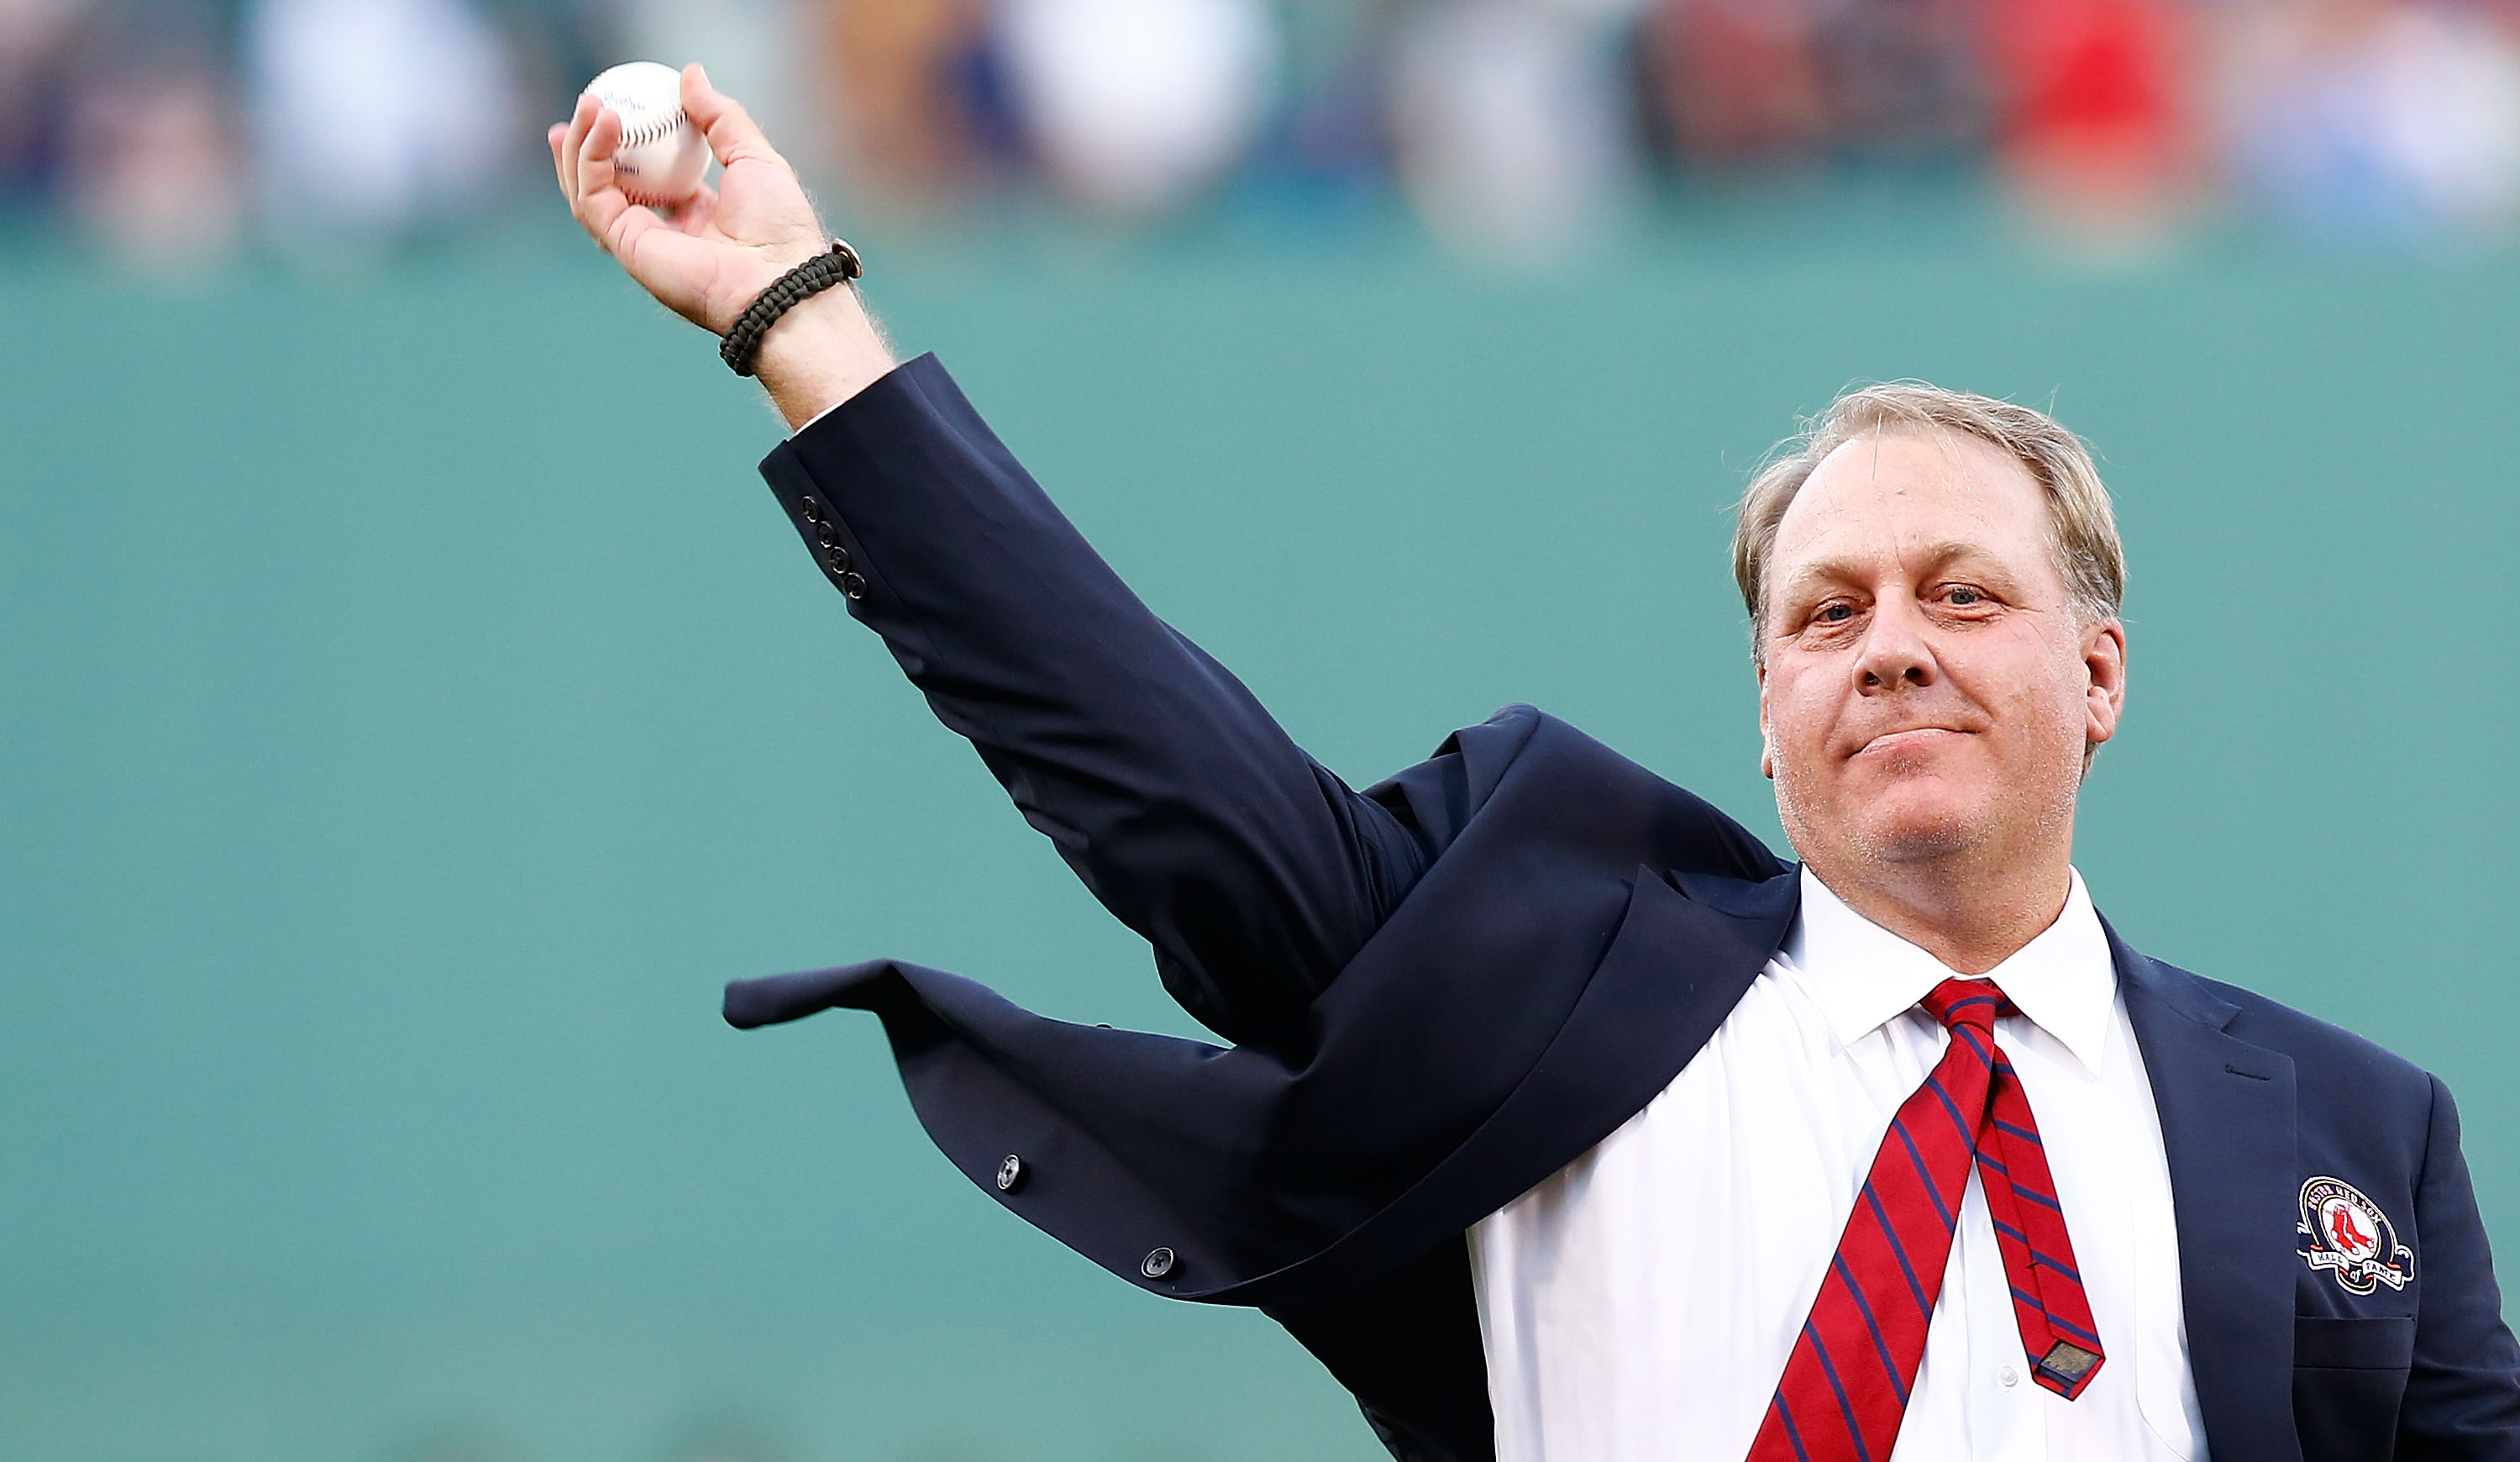 Photos: Curt Schilling through the years